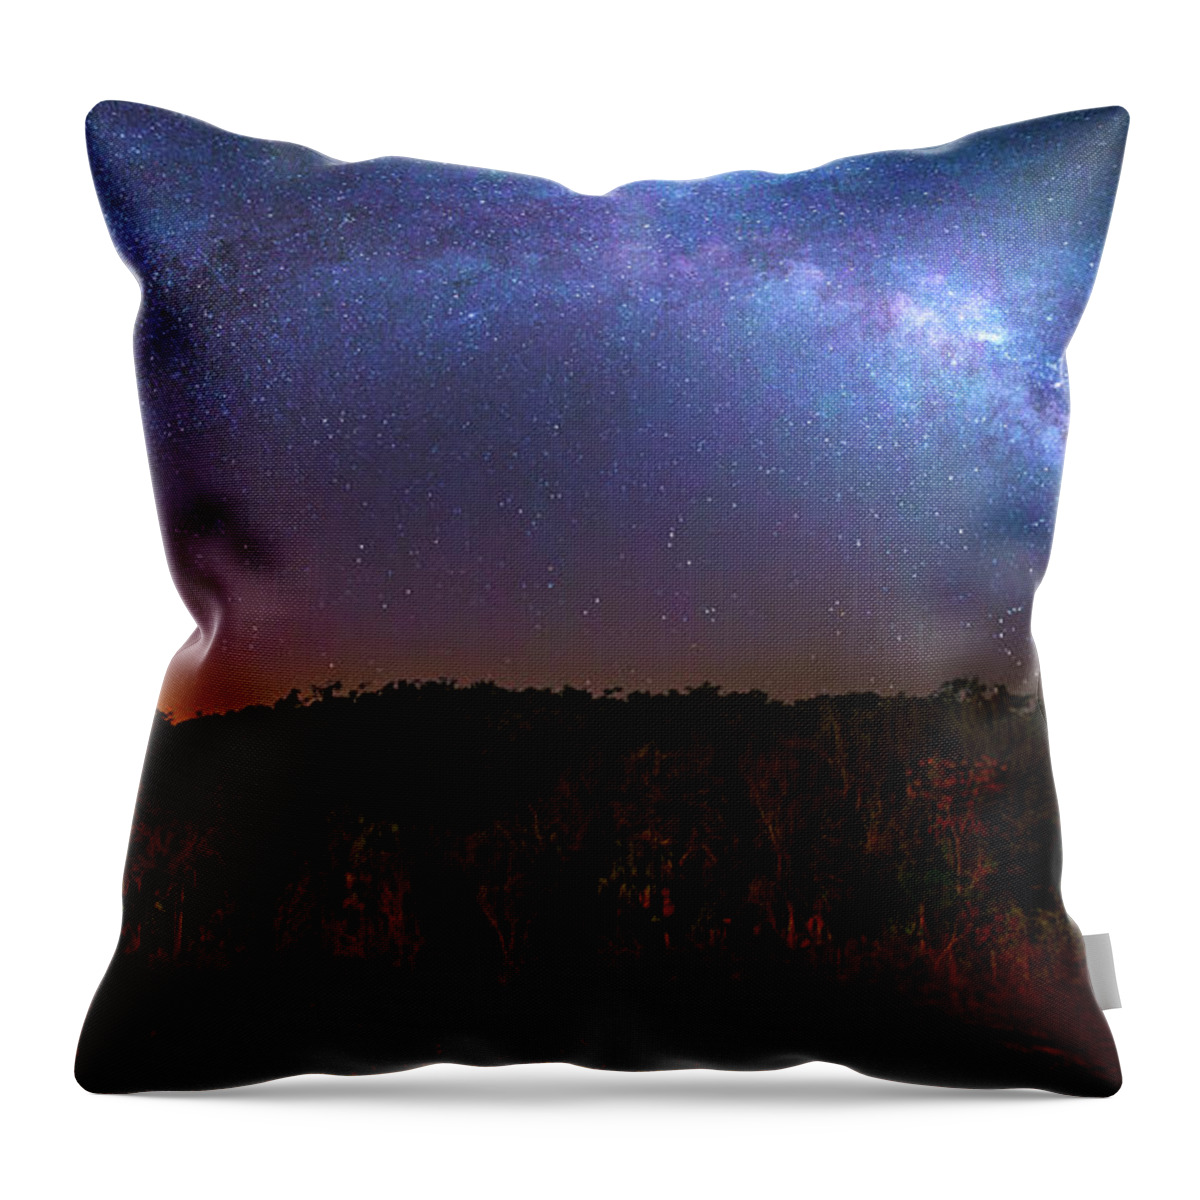 Milky Way Throw Pillow featuring the photograph Sky Bridge by Mark Andrew Thomas